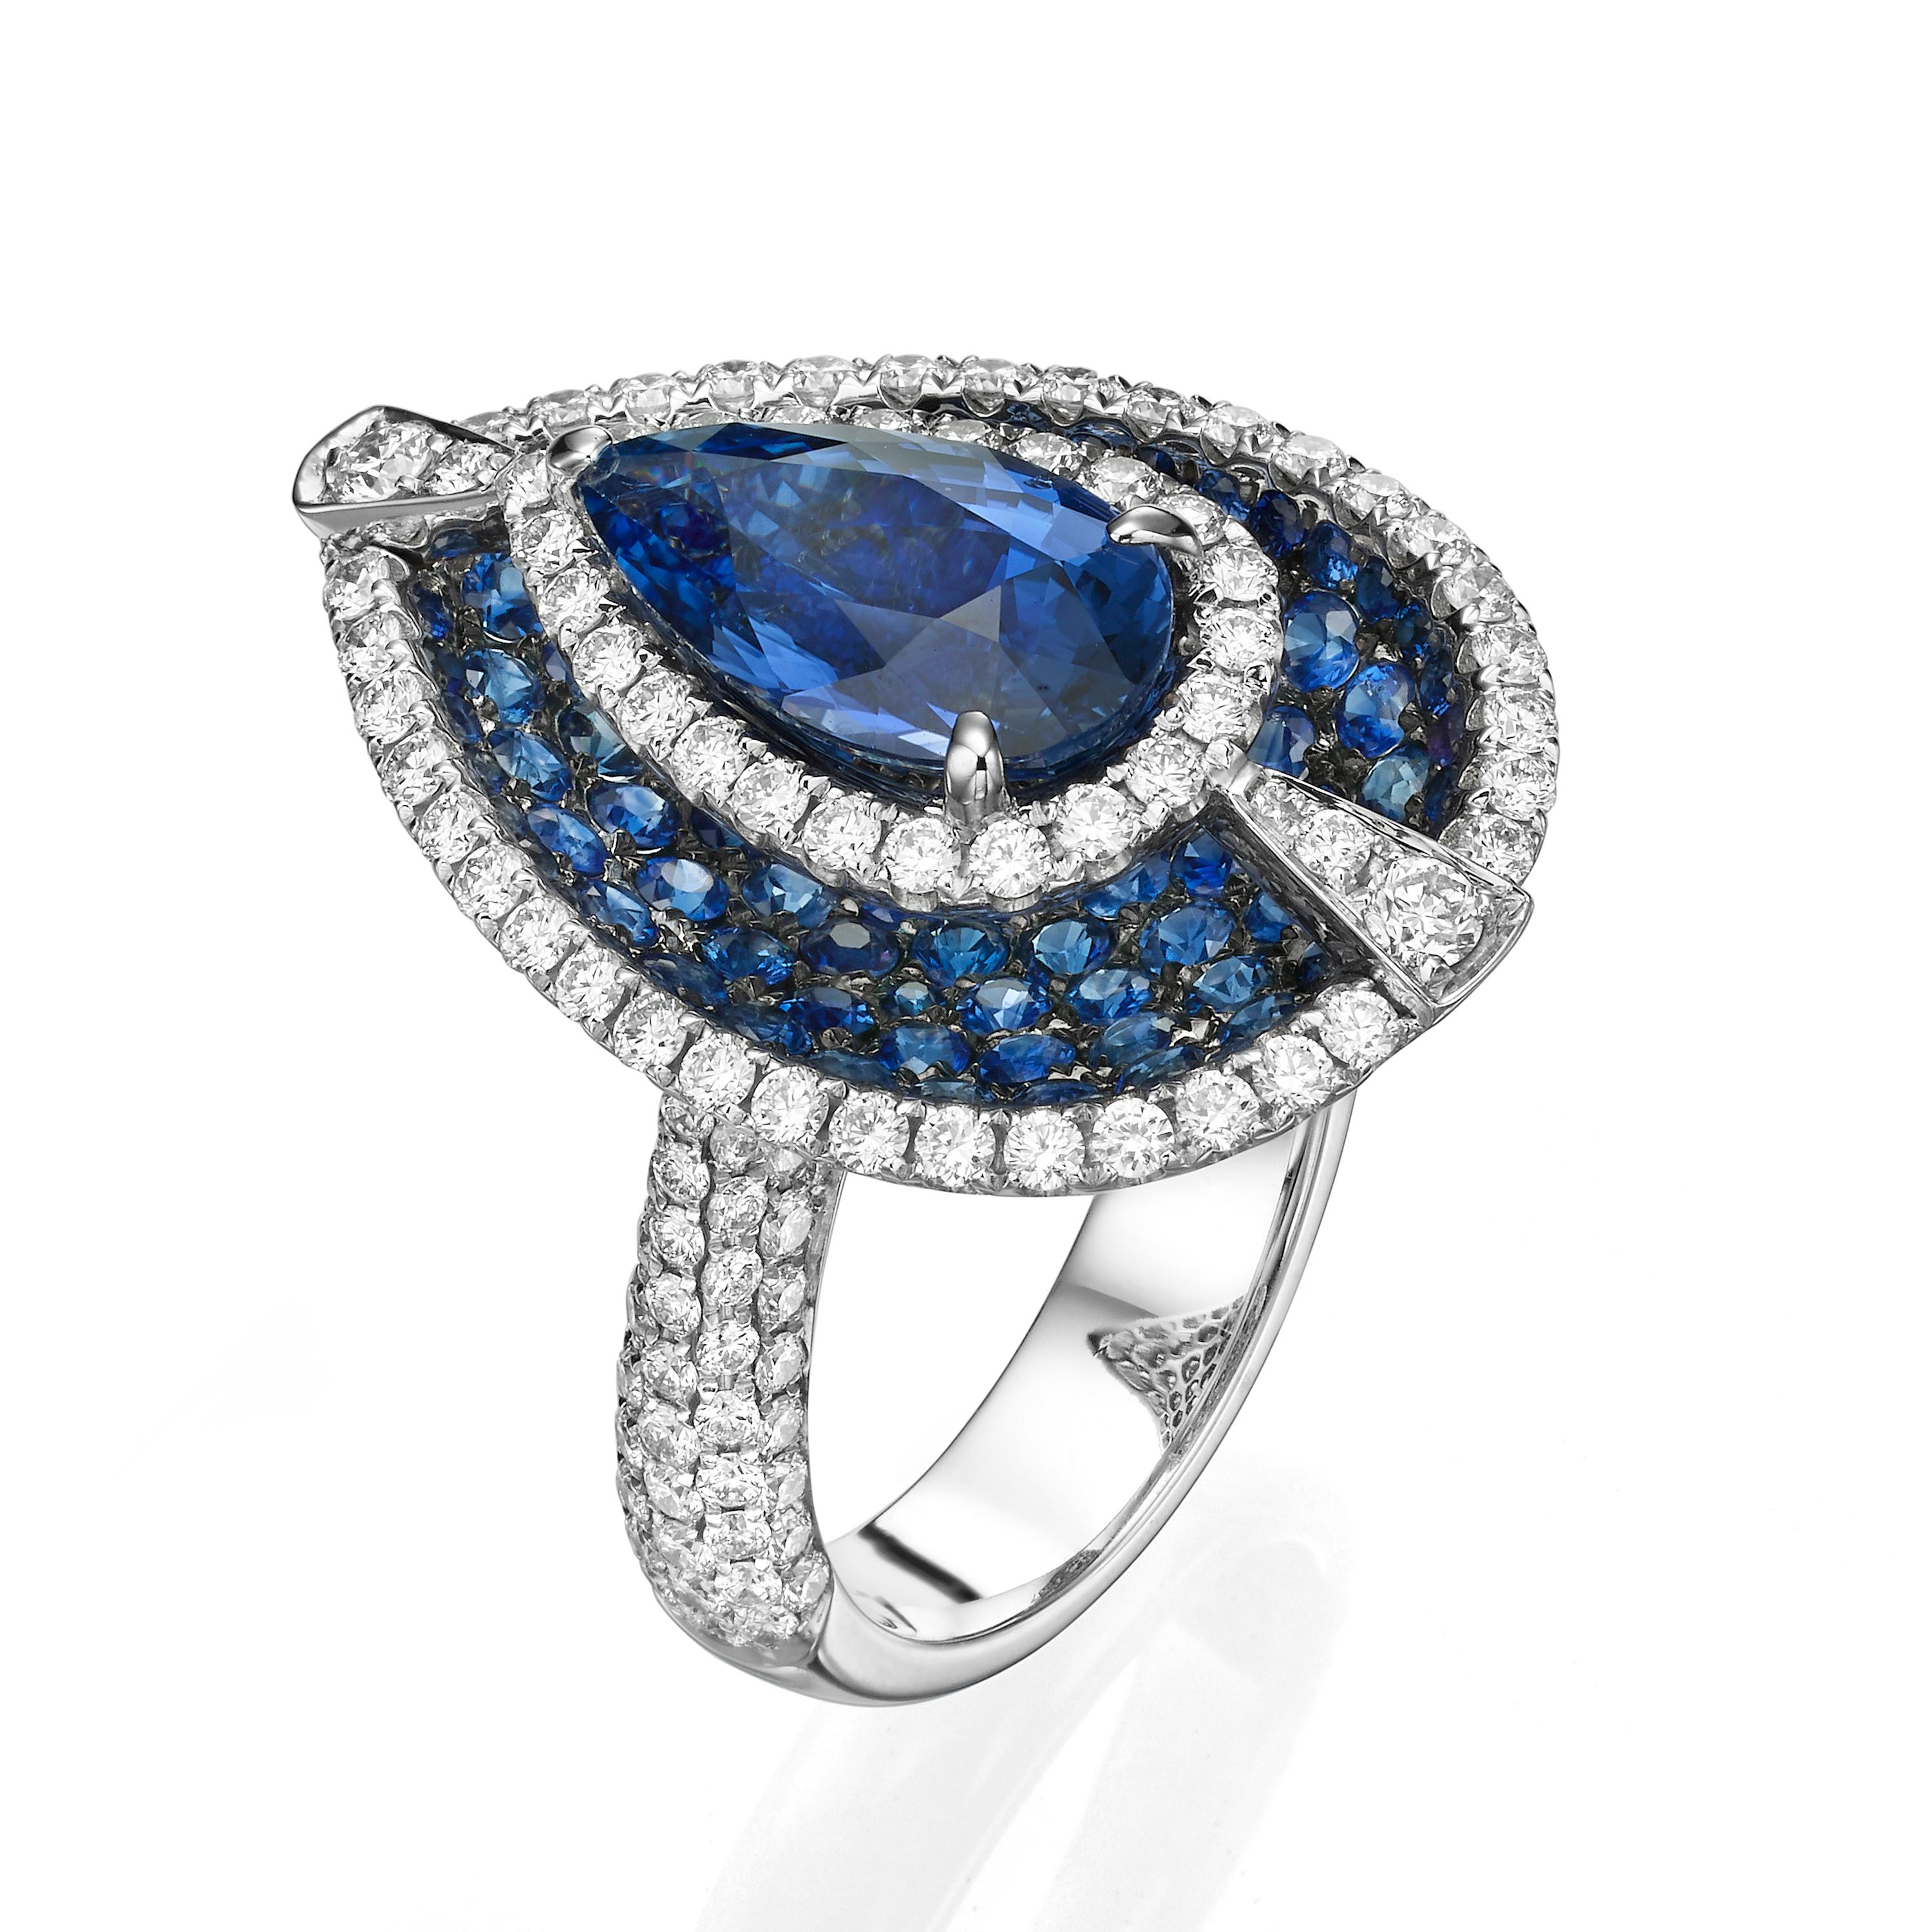 Crafted with a stunning array of gemstones, Butani's opulent ring is molded from lustrous 18-karat white gold.  This design is set with a sizeable 3.73 carat teardrop-shaped blue sapphire surrounded by 1.52 carats of diamonds and 2.47 carats of blue